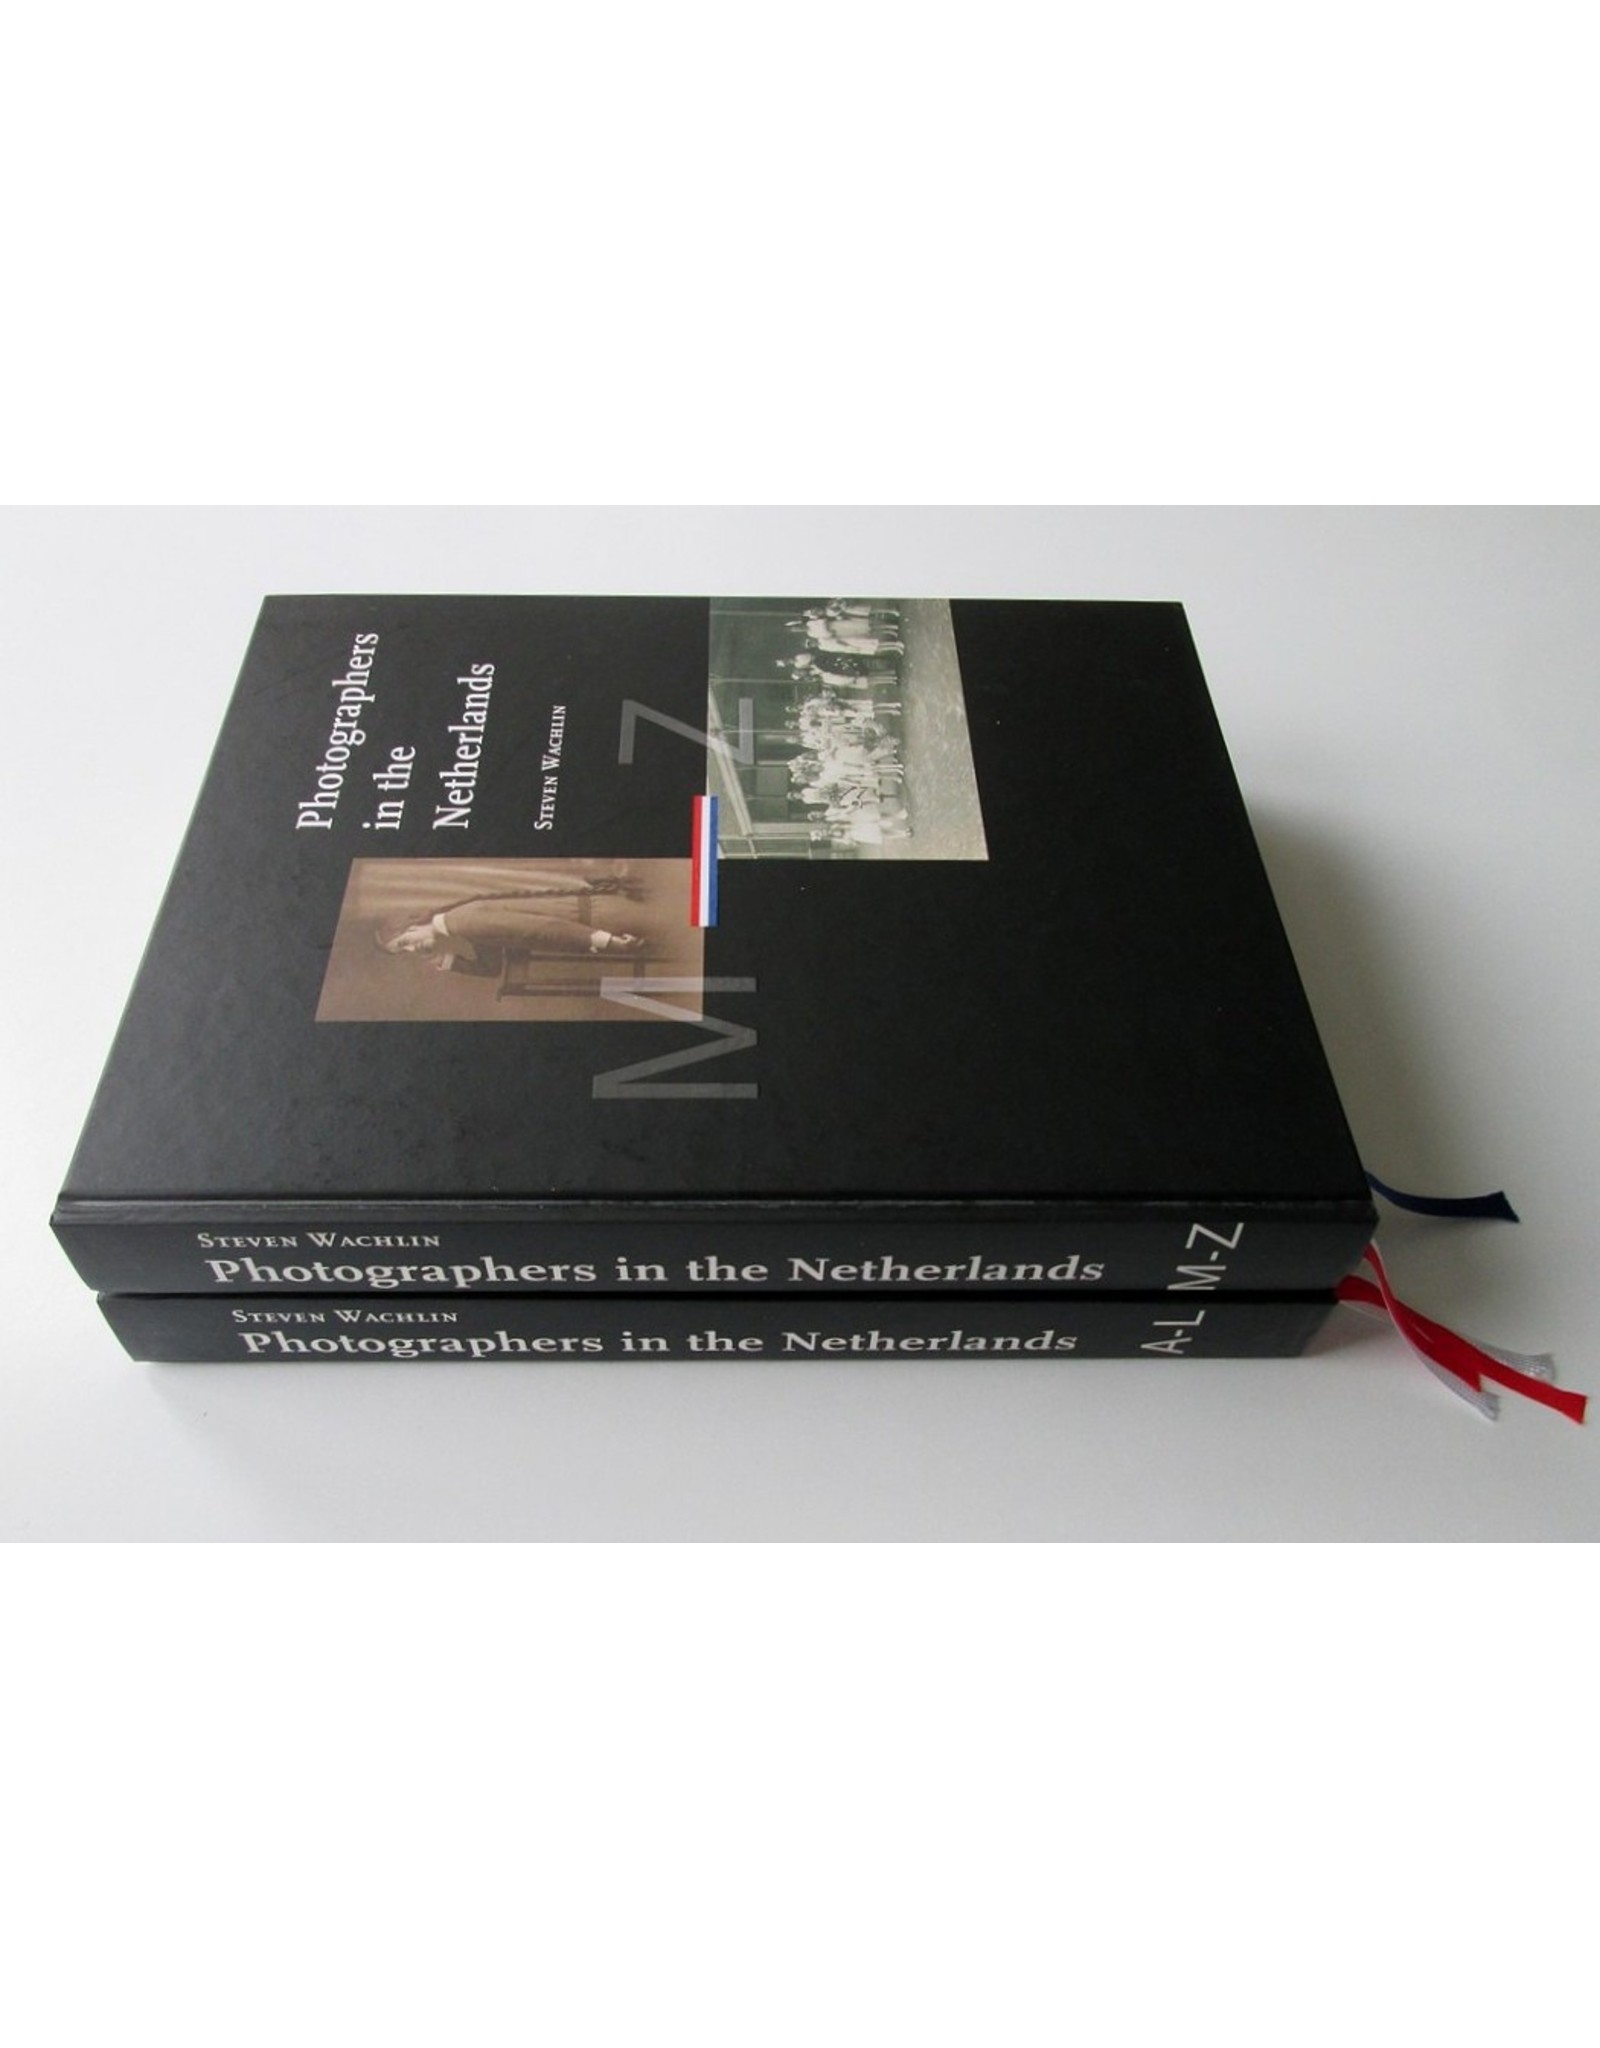 Steven Wachlin - Photographers in the Netherlands: A survey of commercial photographers born before 1900 [...]